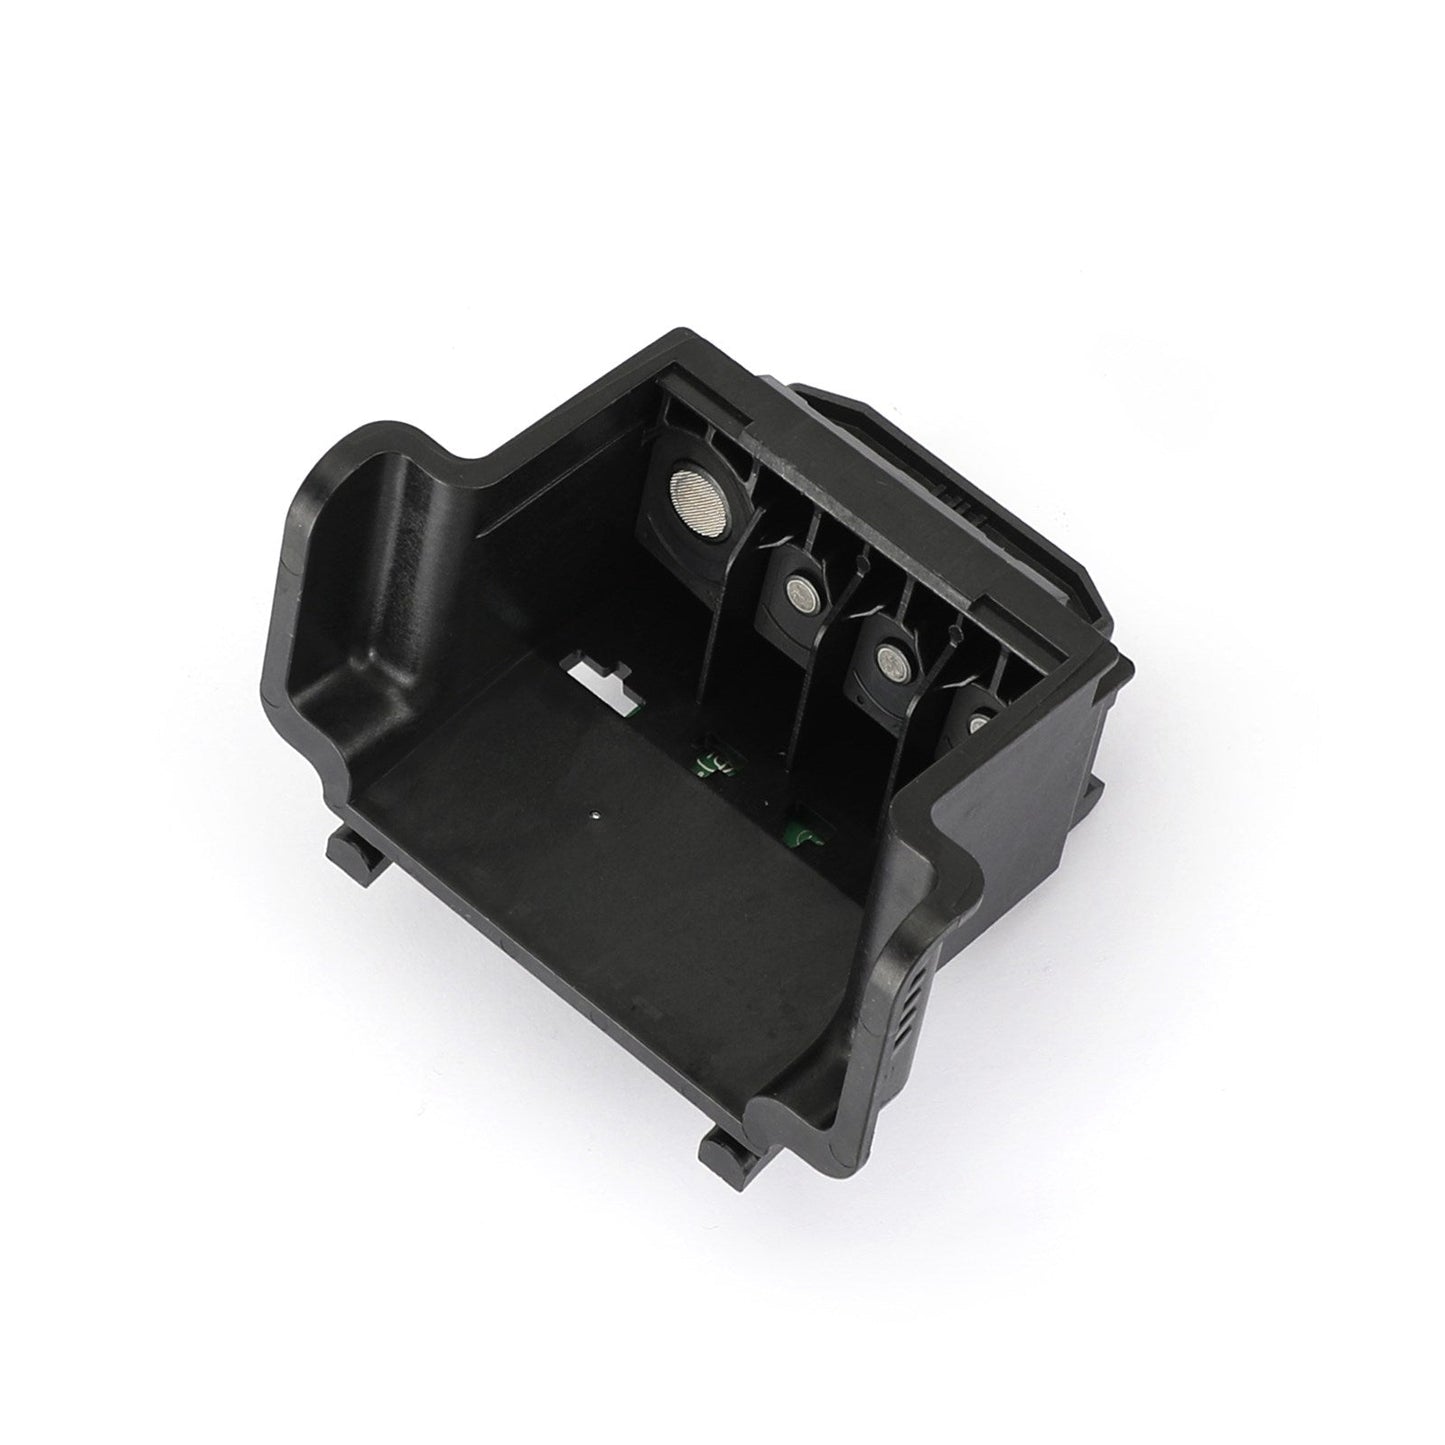 Replacement Printer Print Head CN688A Fit for HP 3070 3520 5525 4620 5520 5510